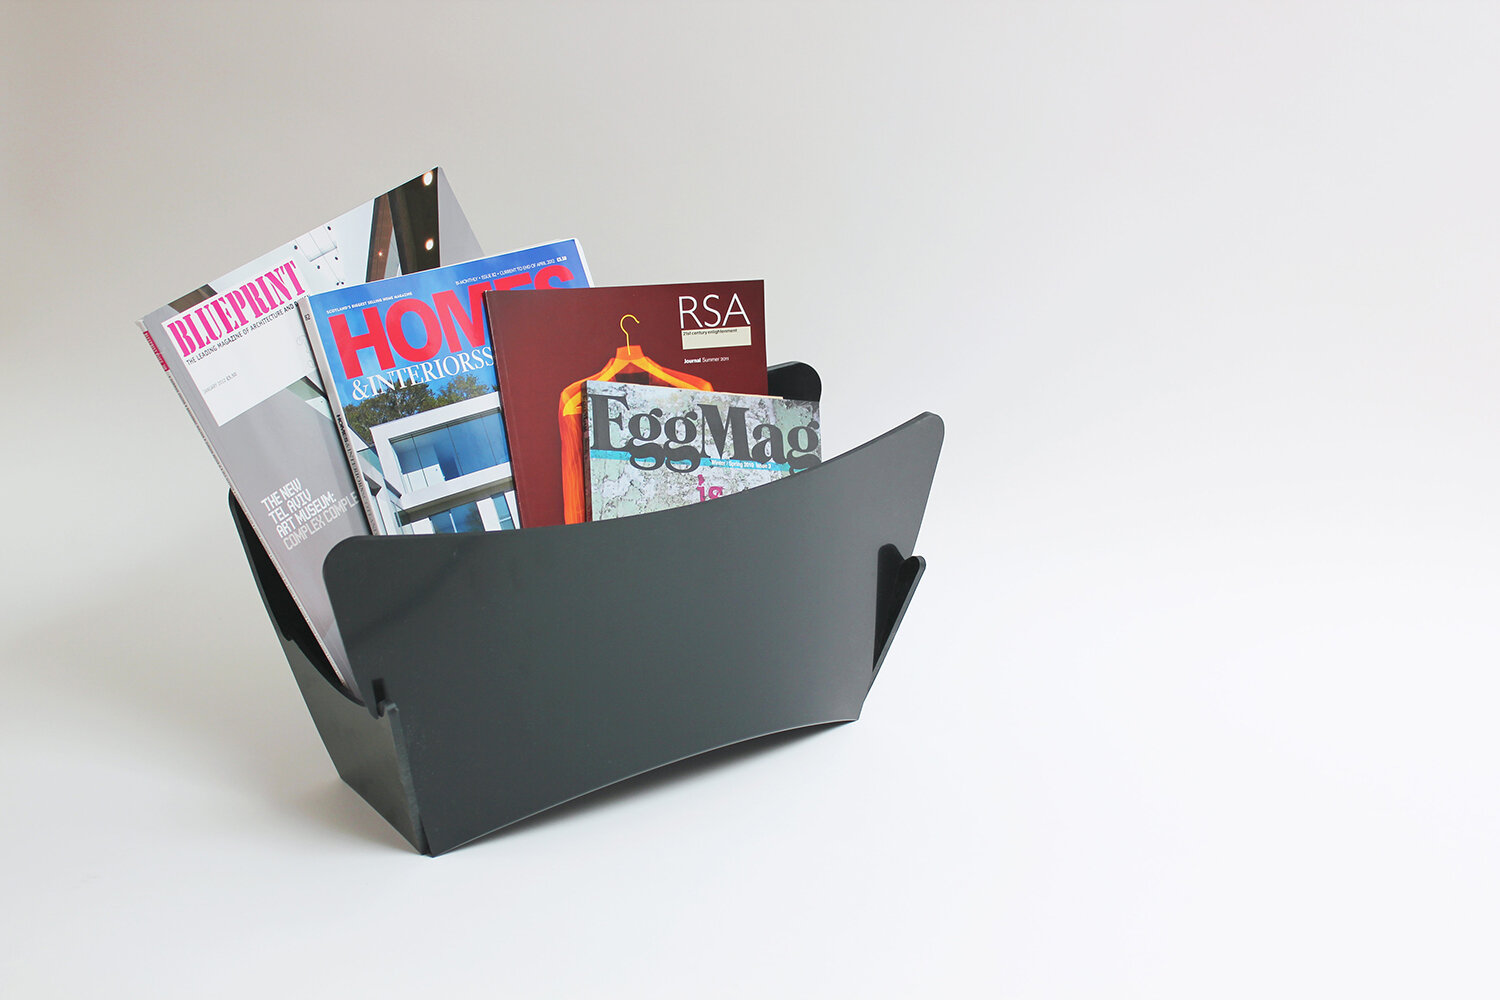 Blue-Marmalade-Crease-magazine-holder-fan-recycled-plastic-living-room-black-zero-waste-recyclable.jpg